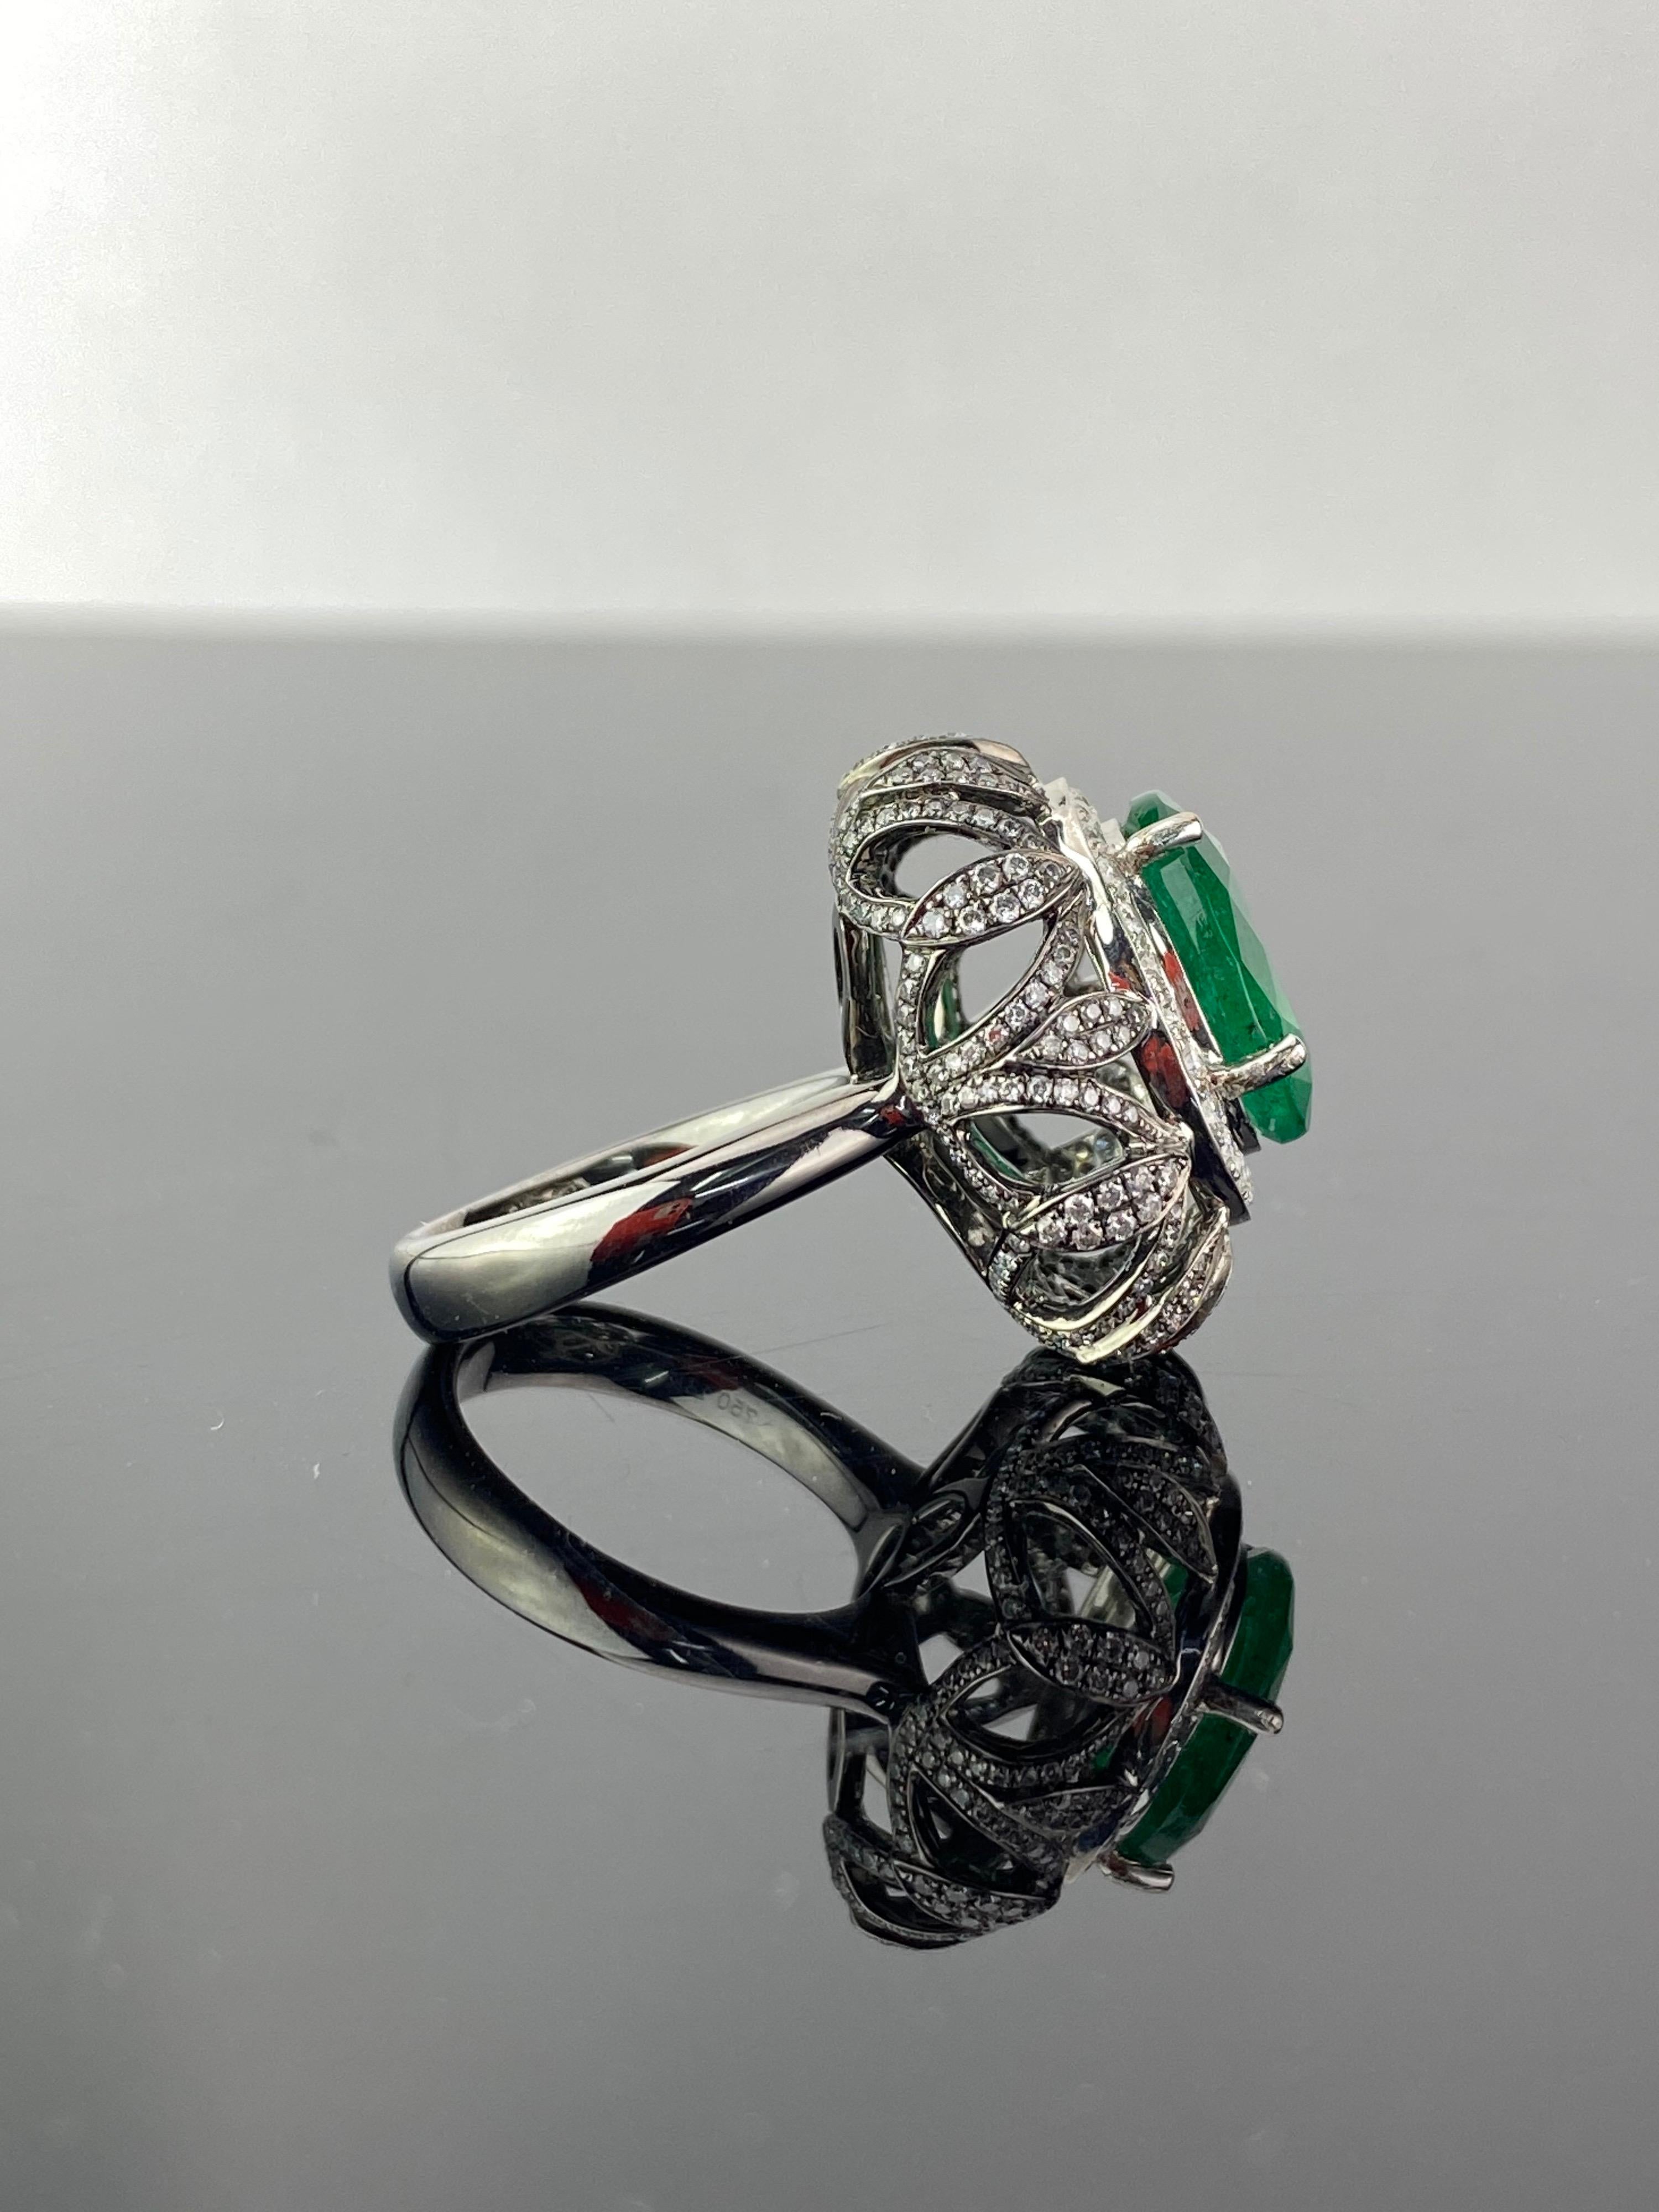 A statement 4.97 carat Zambian Emerald and Diamond dome cocktail ring, with 1.8 carat White Diamonds - set in solid 18K Gold (white and black rhodium plated). The ring is currently sized at US 7, and is resizable. 
We are jewelry manufacturers,